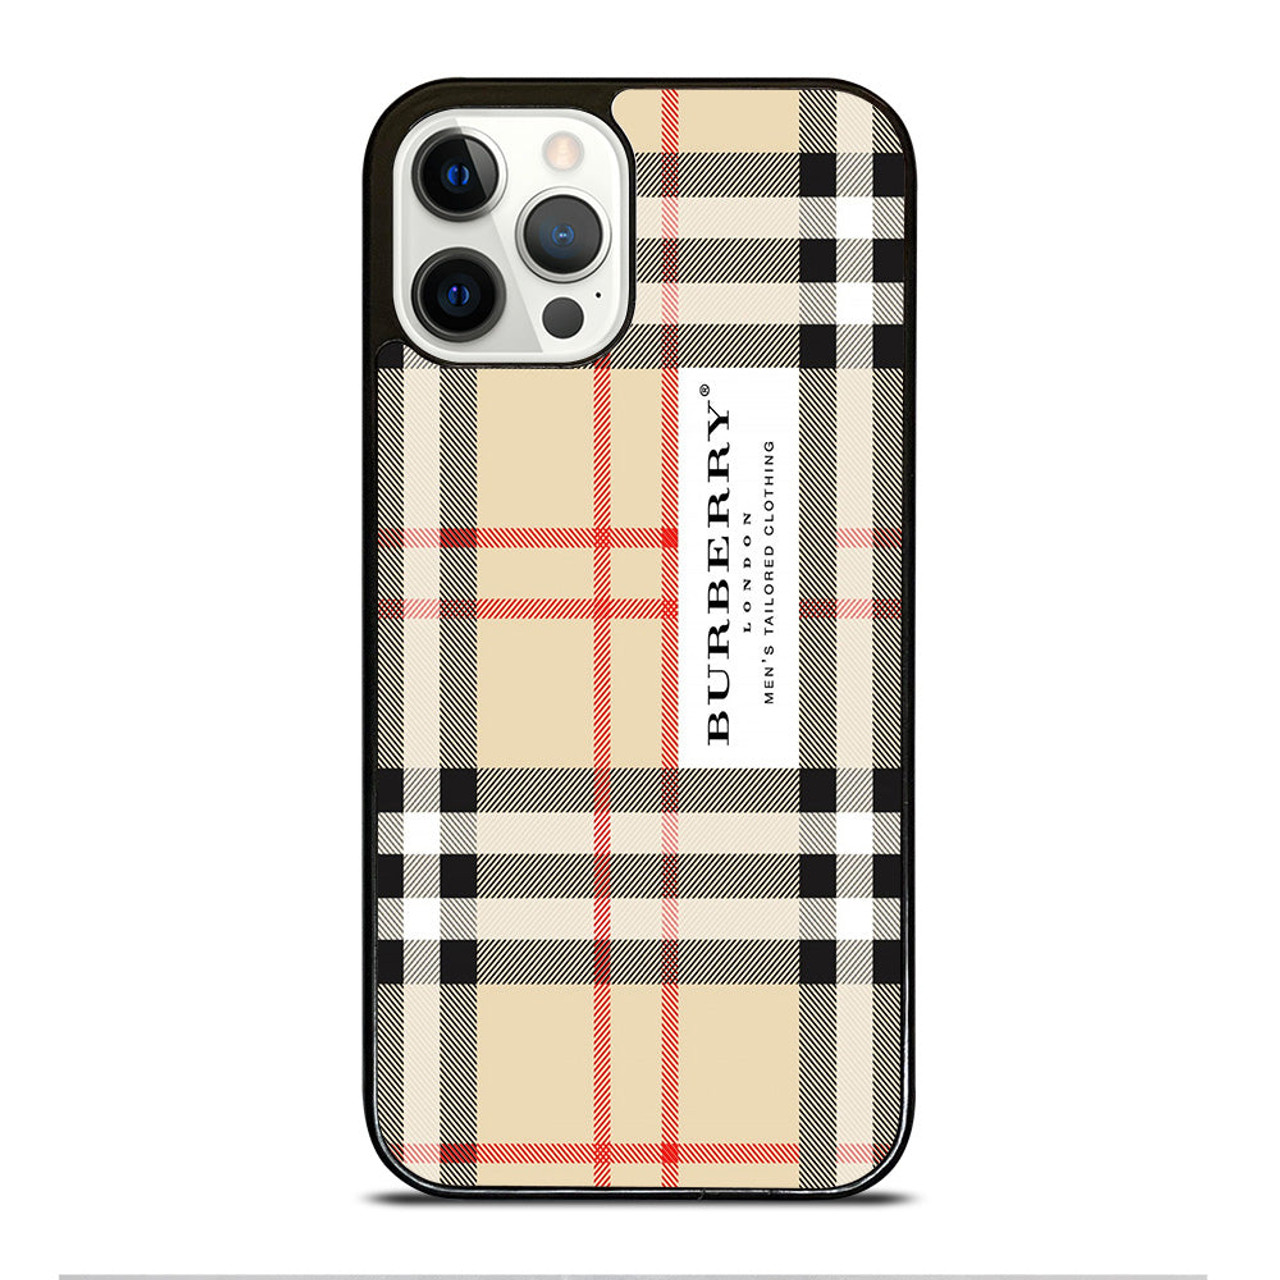 BURBERRY LONDON iPhone 12 Pro Case Cover